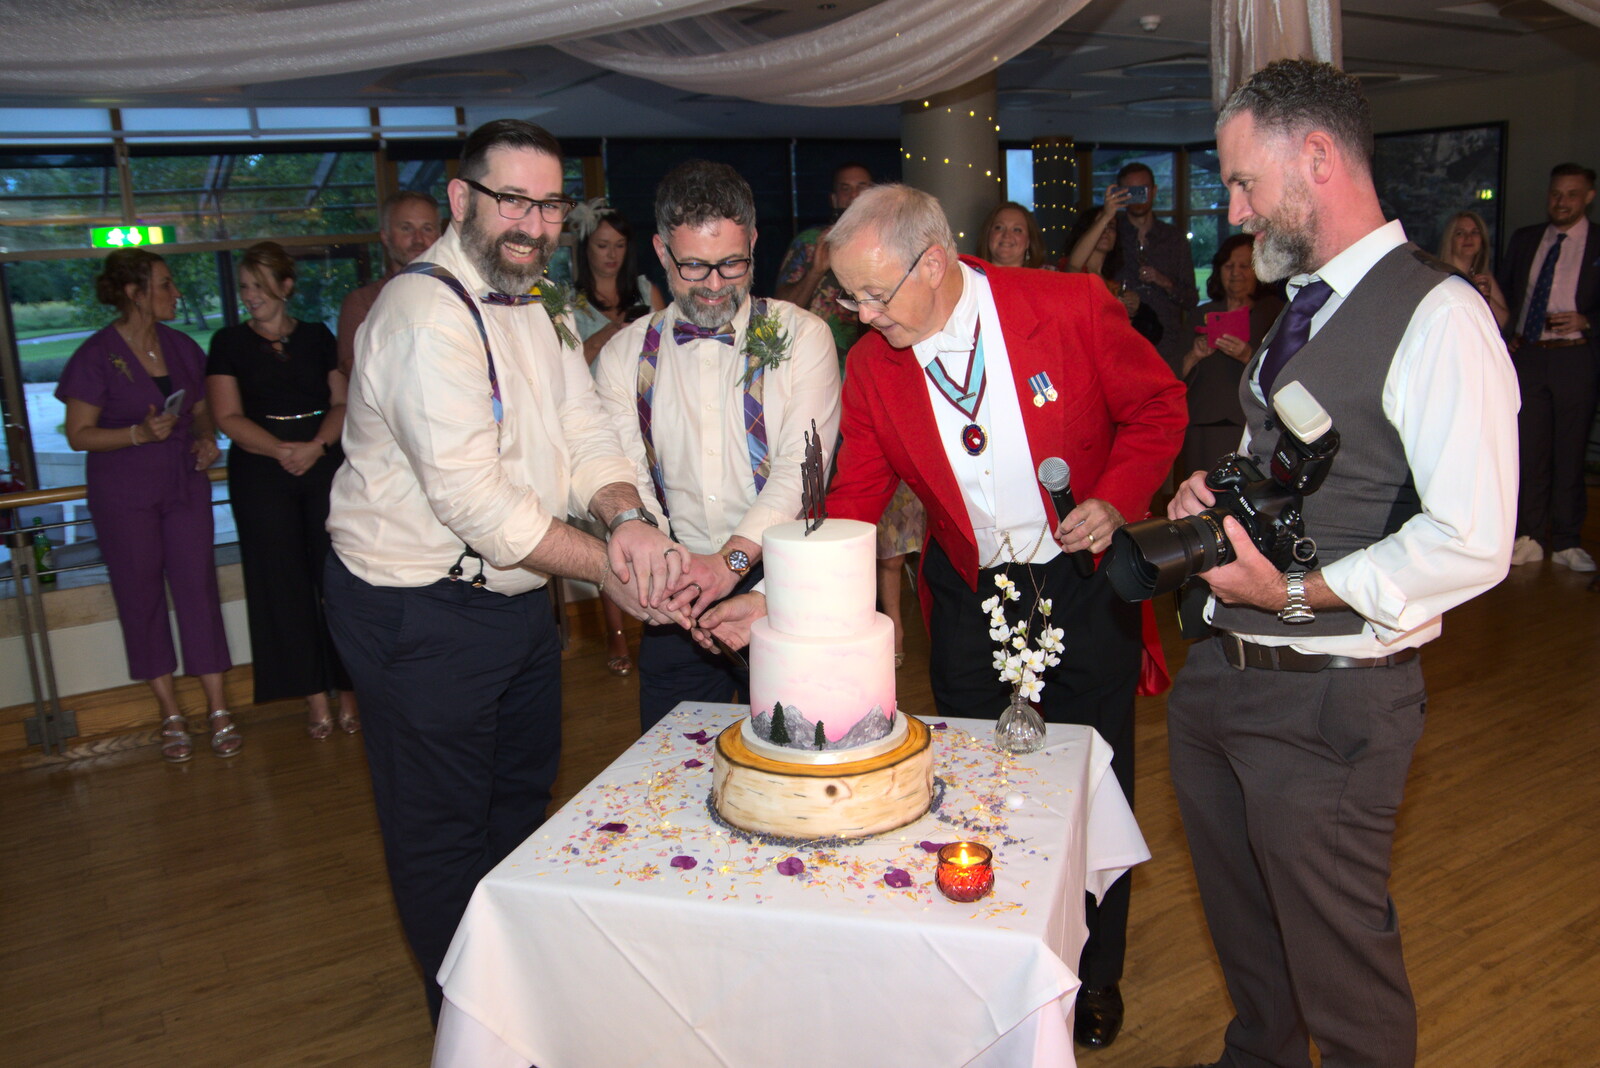 The cutting of the cake is set up from Petay's Wedding Reception, Fanhams Hall, Ware, Hertfordshire - 20th August 2021